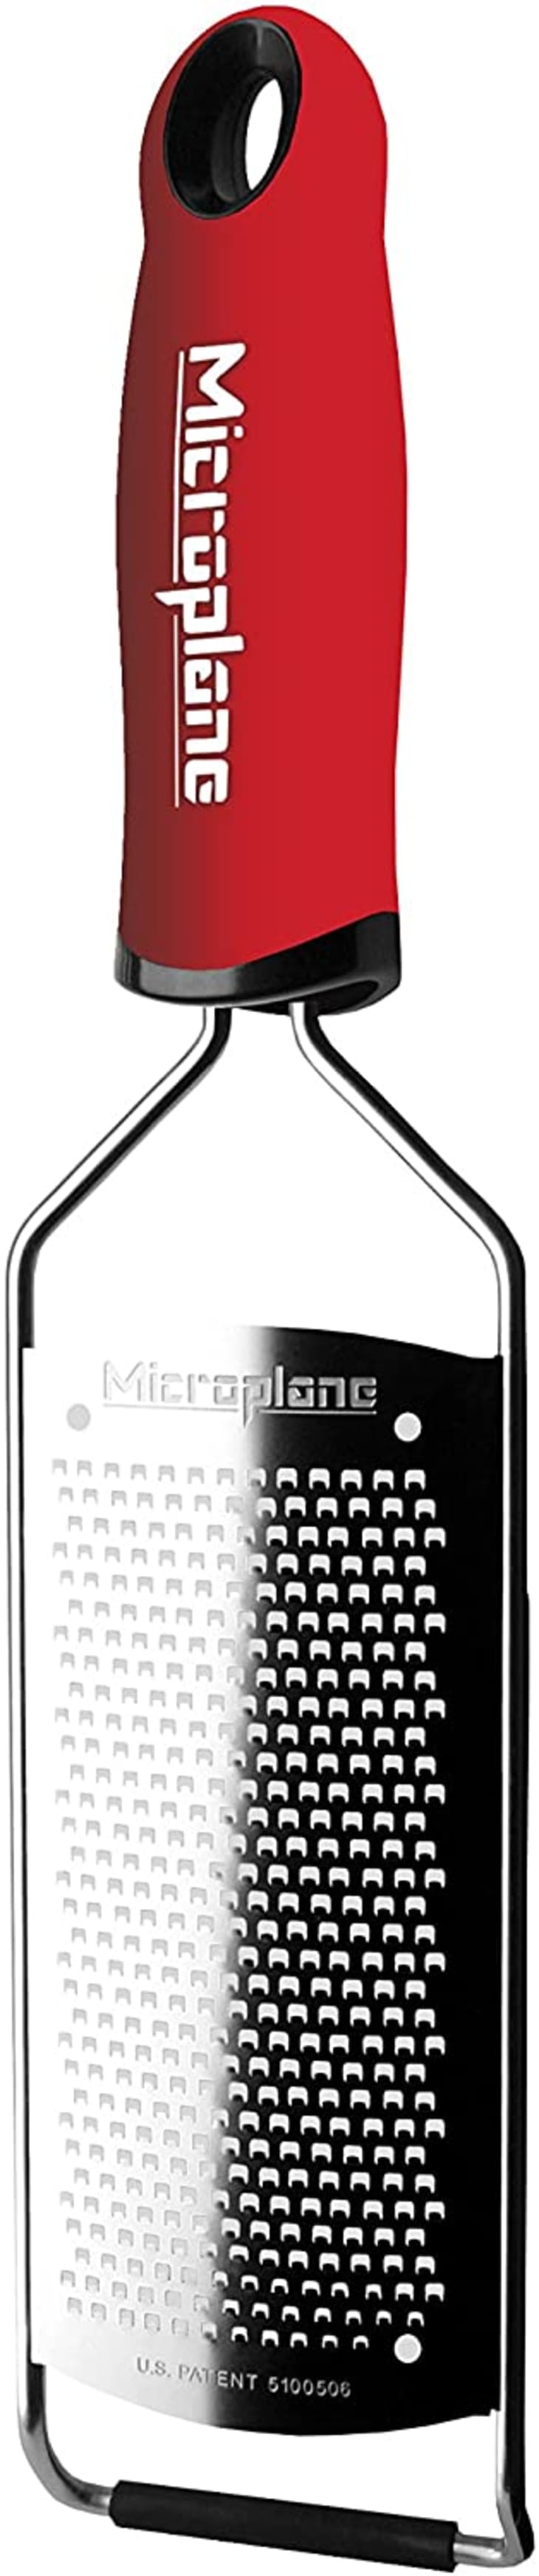 Product Image: Microplane Gourmet Series Fine Grater